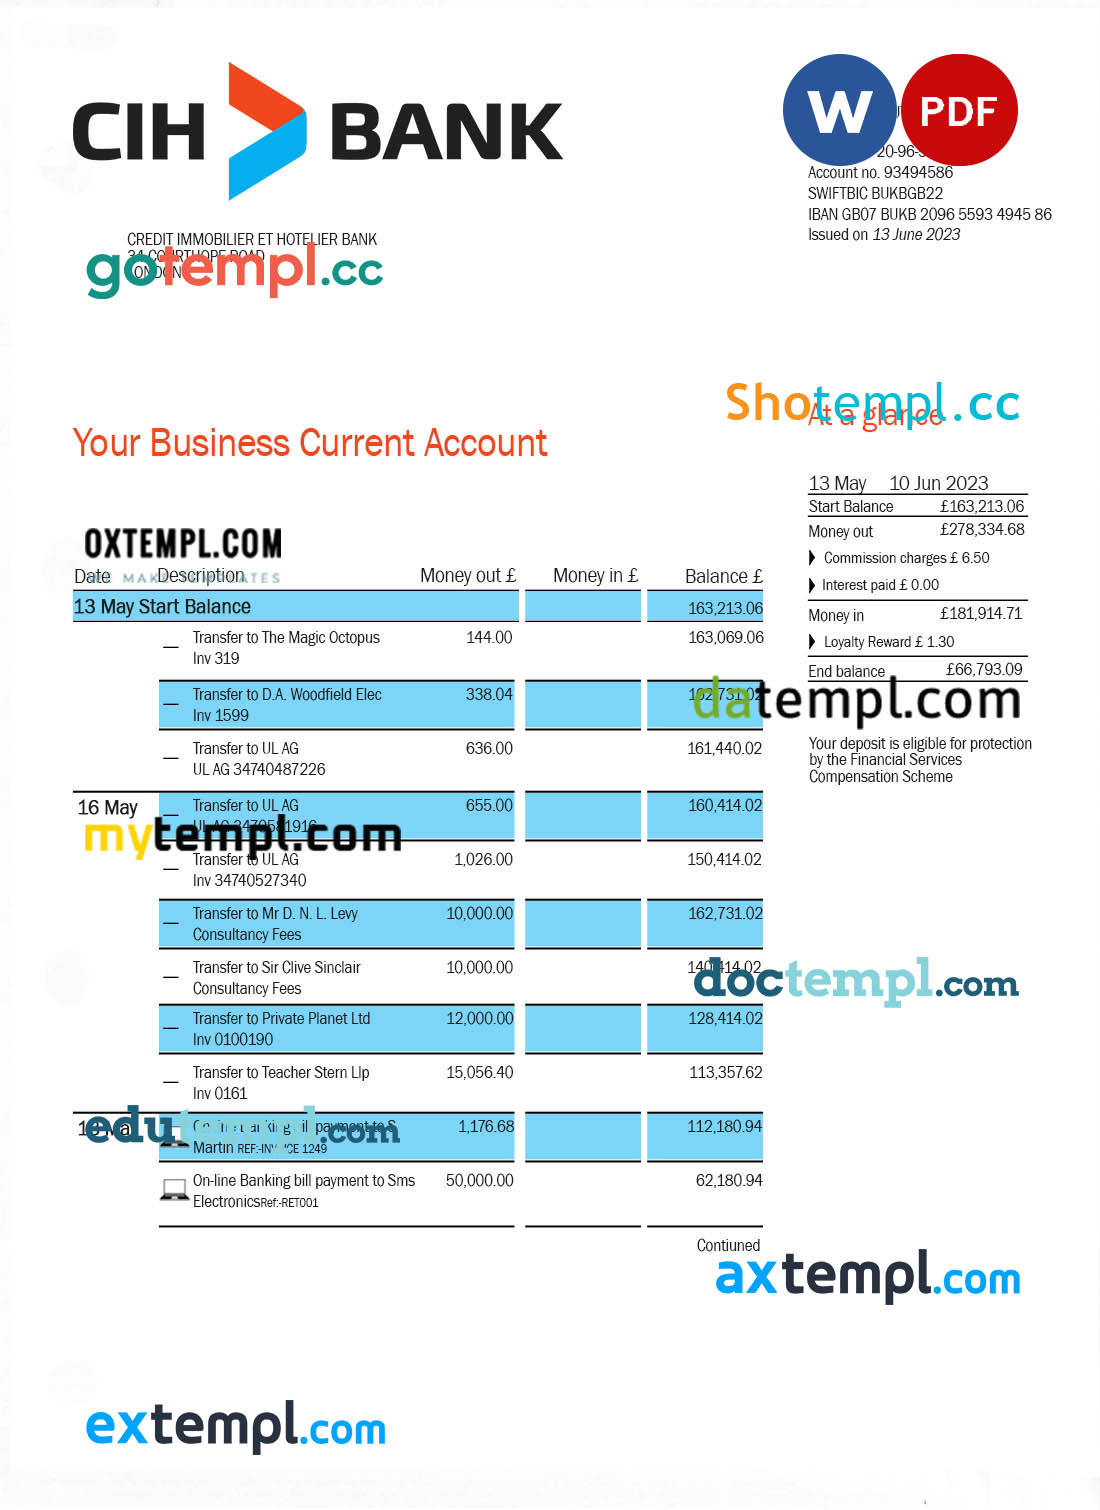 editable template, Credit Immobilier Et Hotelier enterprise account statement Word and PDF template